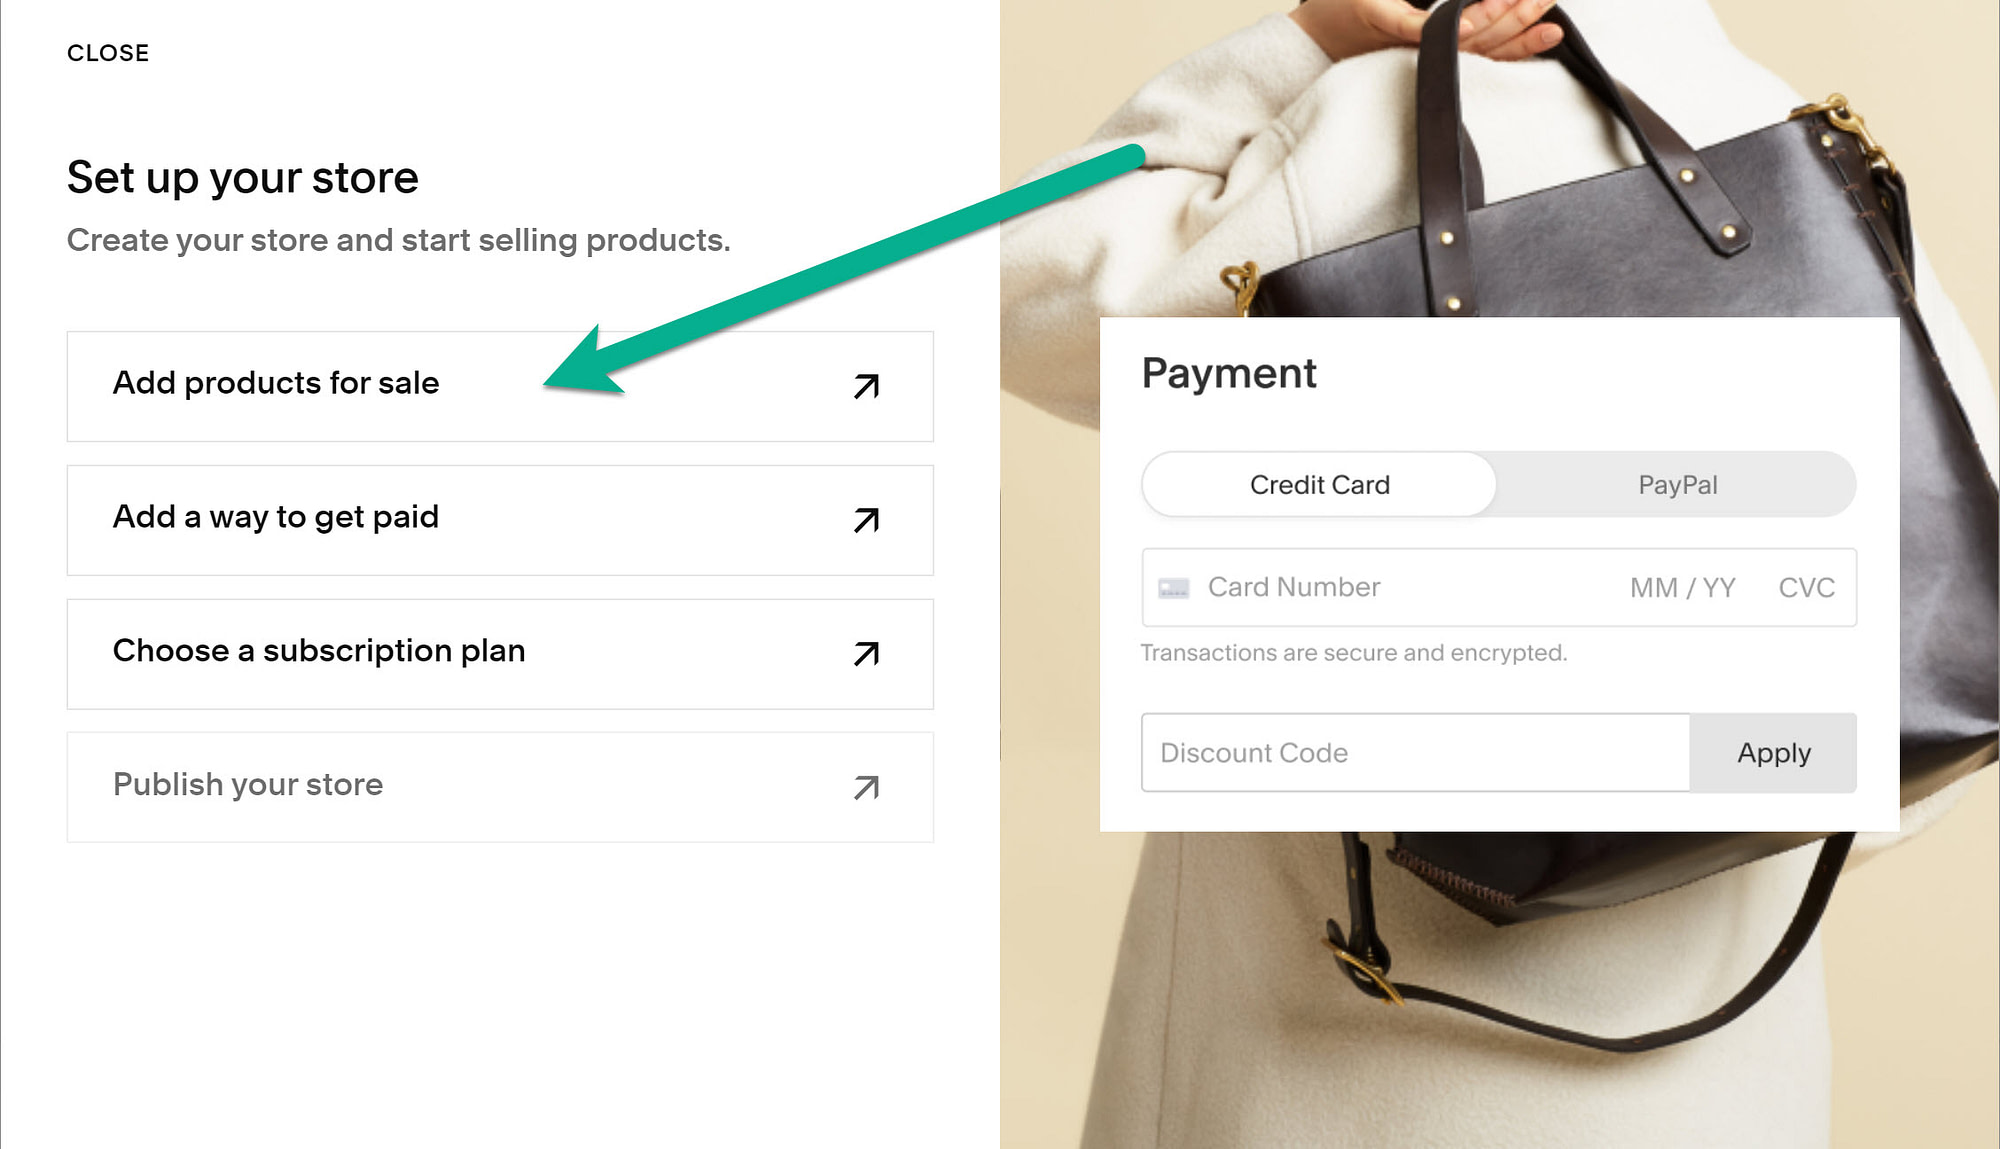 add products for sale - Squarespace tutorial